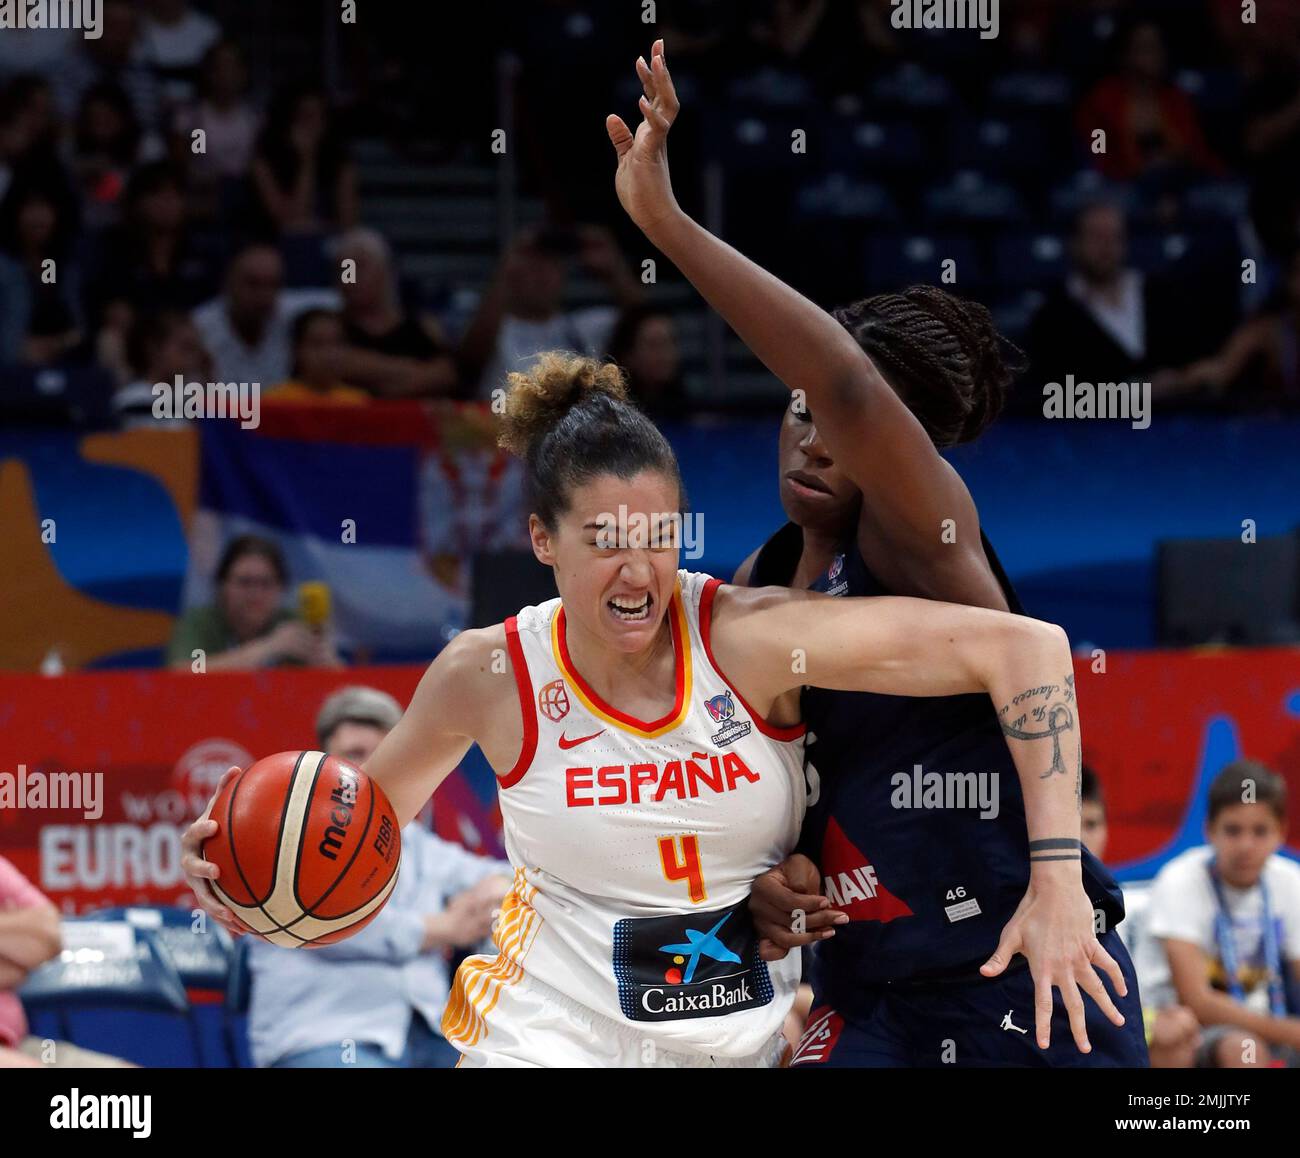 Spain's Laura Nicholls, left, drives to the basket as France's Endene Miyem  tries to block her during the Women's 2019 Eurobasket European Basketball  Championship final match between Spain and France in Belgrade,